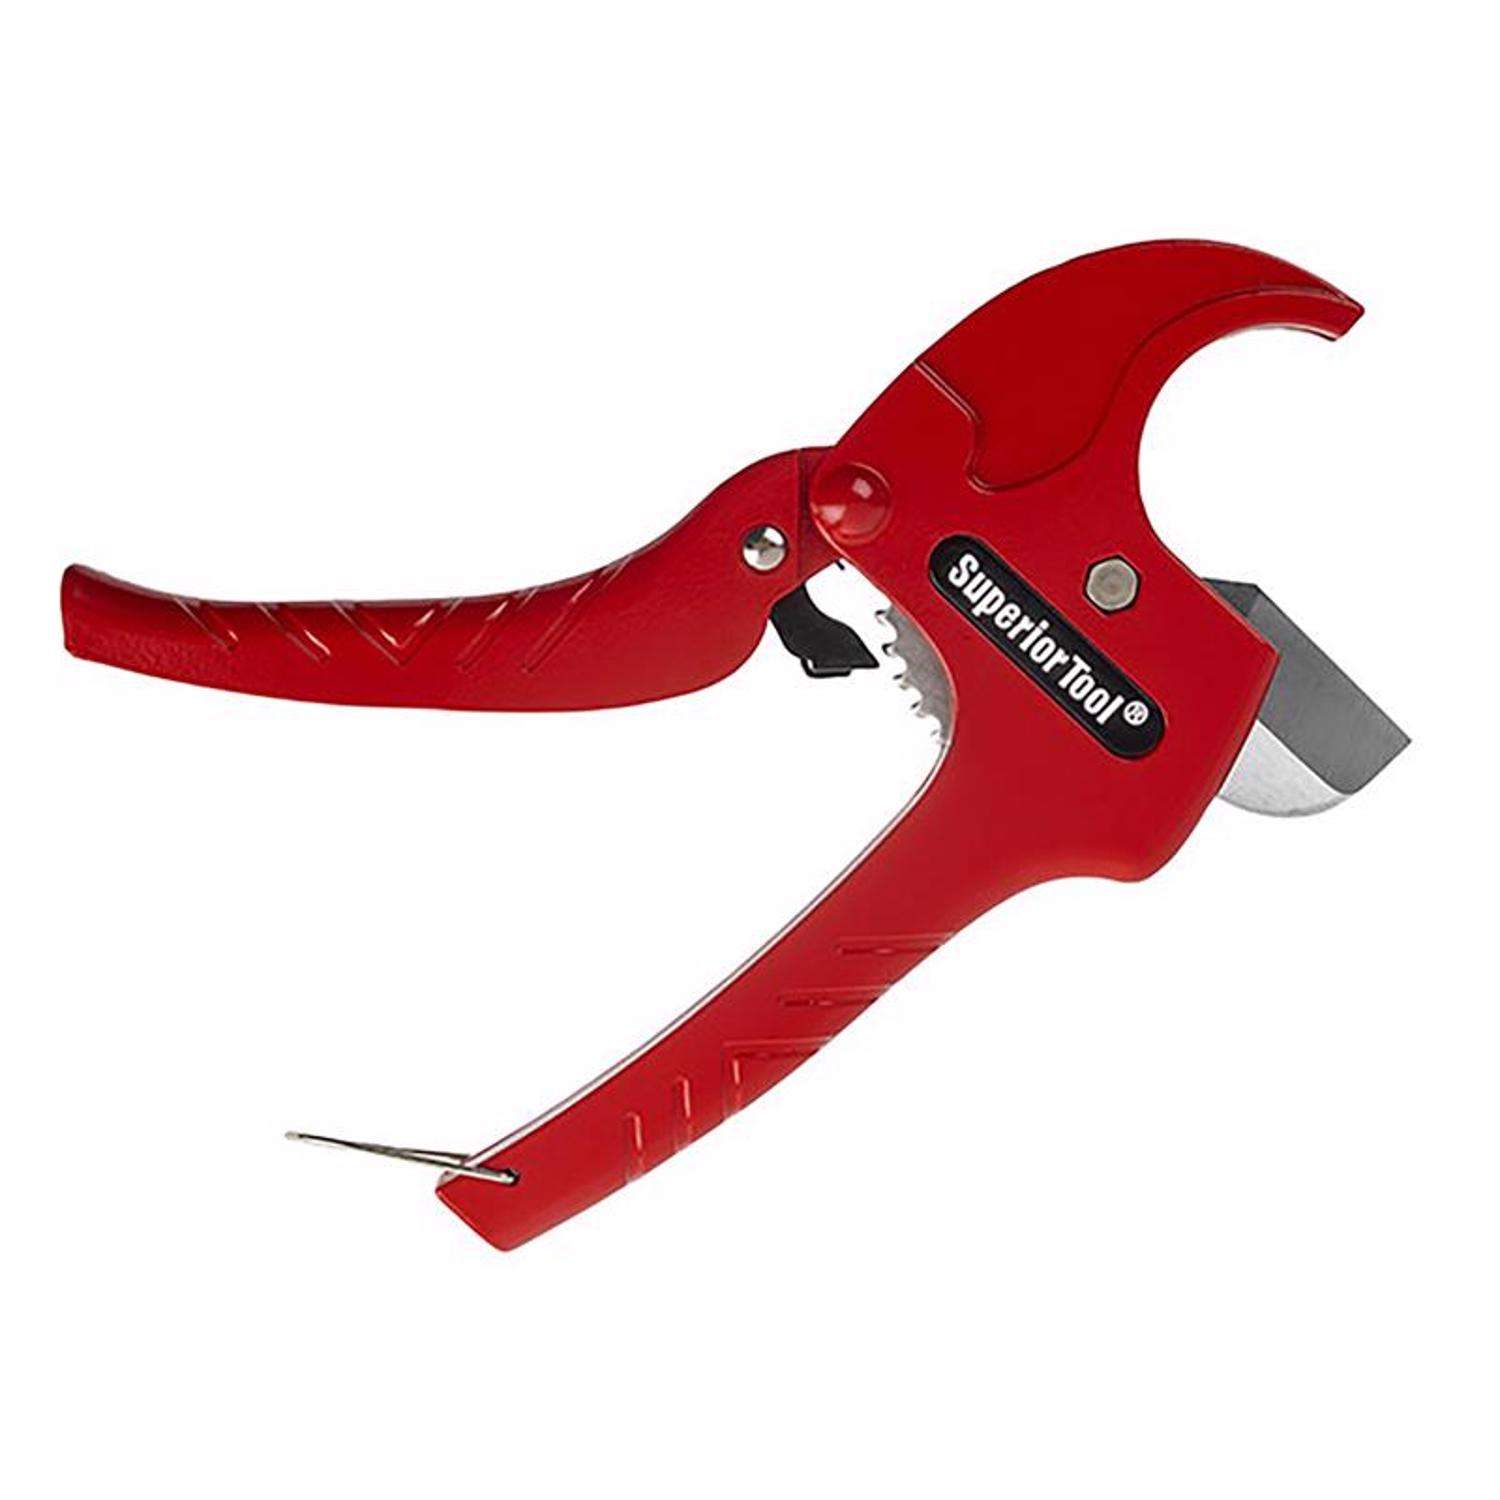 Milwaukee M12 2 in. PVC Pipe Cutter Black/Red 1 pk - Ace Hardware